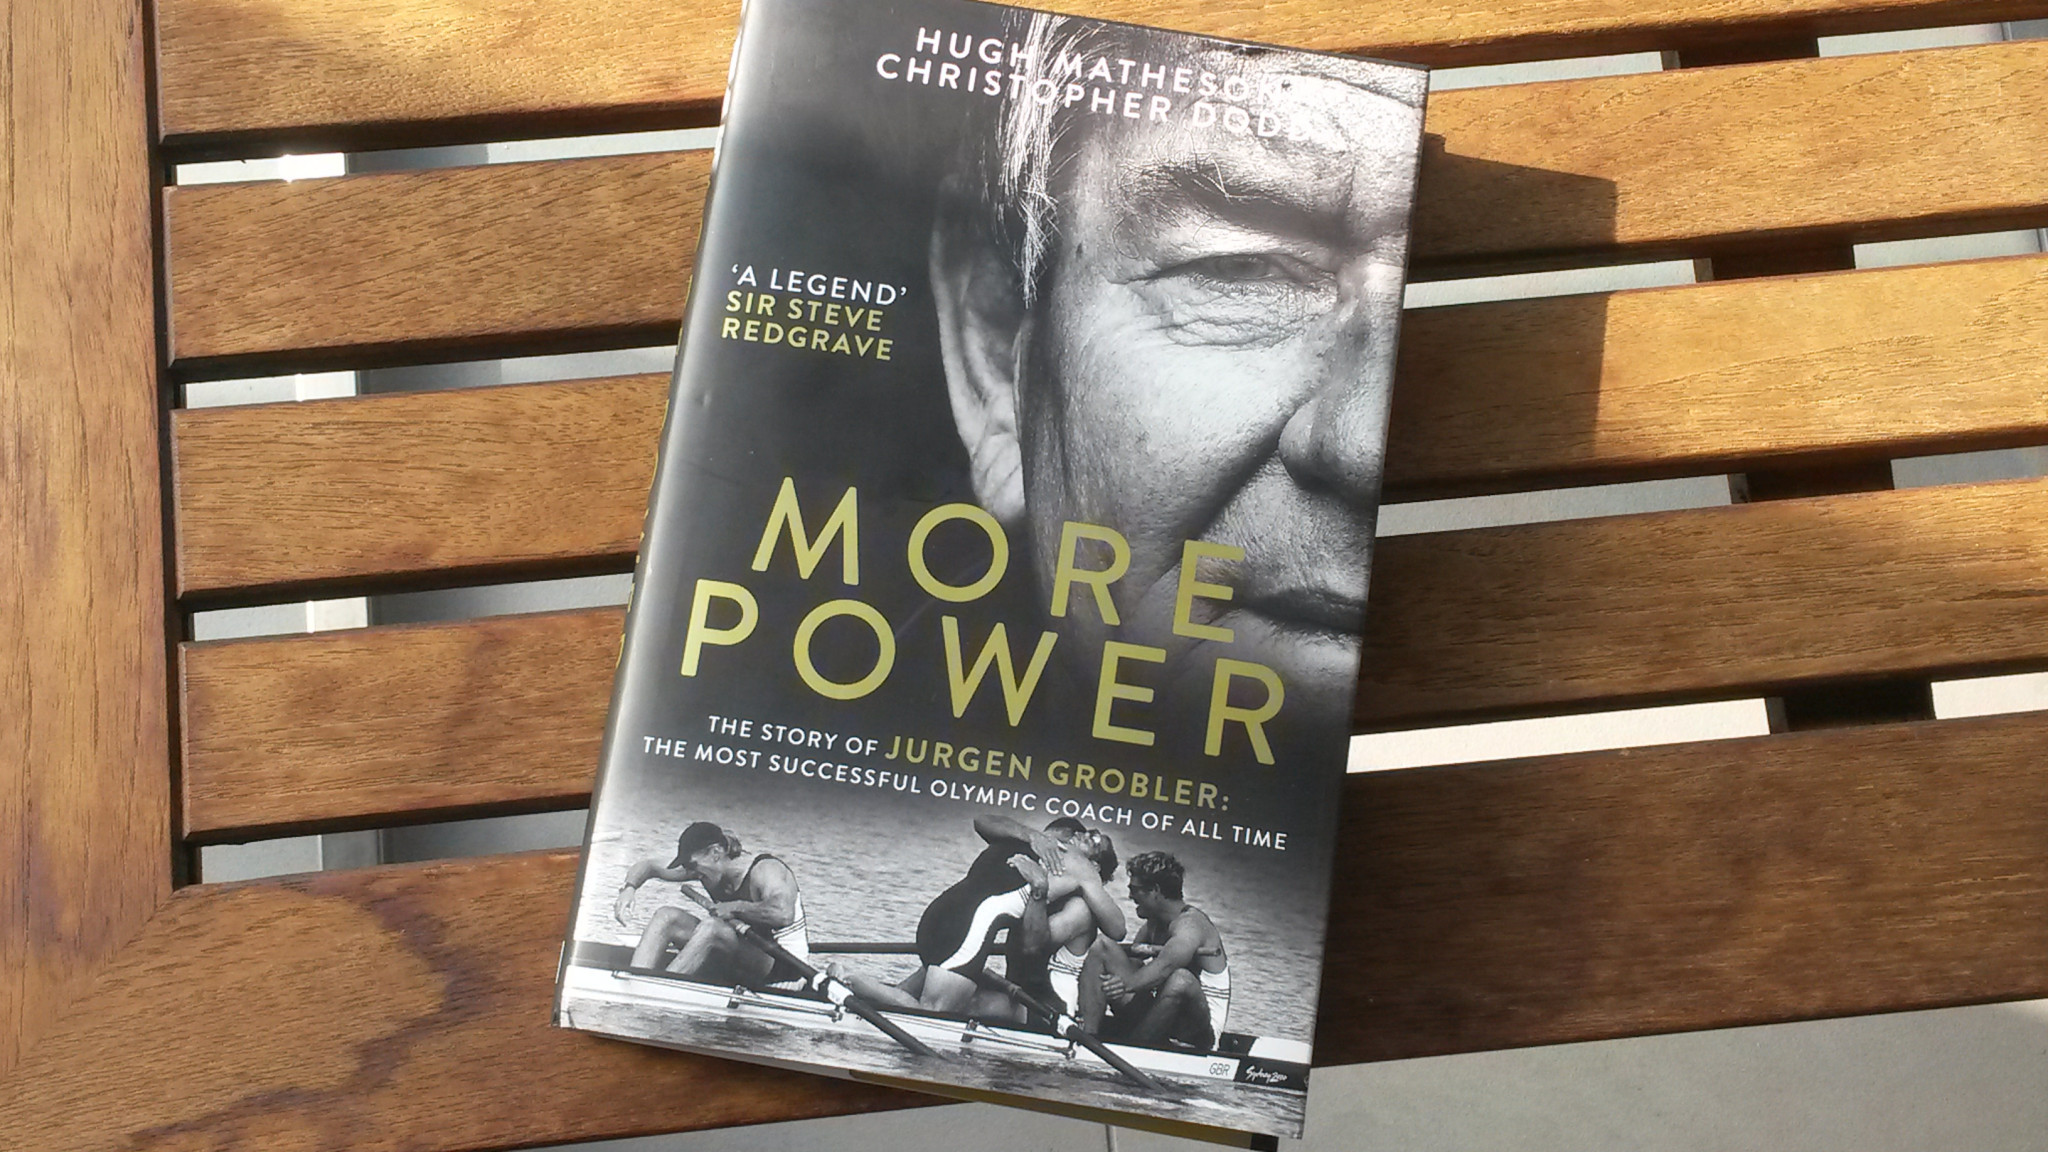 Former Olympic rower Hugh Matheson and journalist and sport historian Chris Dodd have produced a hugely knowledgeable new account of Grobler's life in sport, from his years within the East German system to his second challenge within British rowing ©ITG